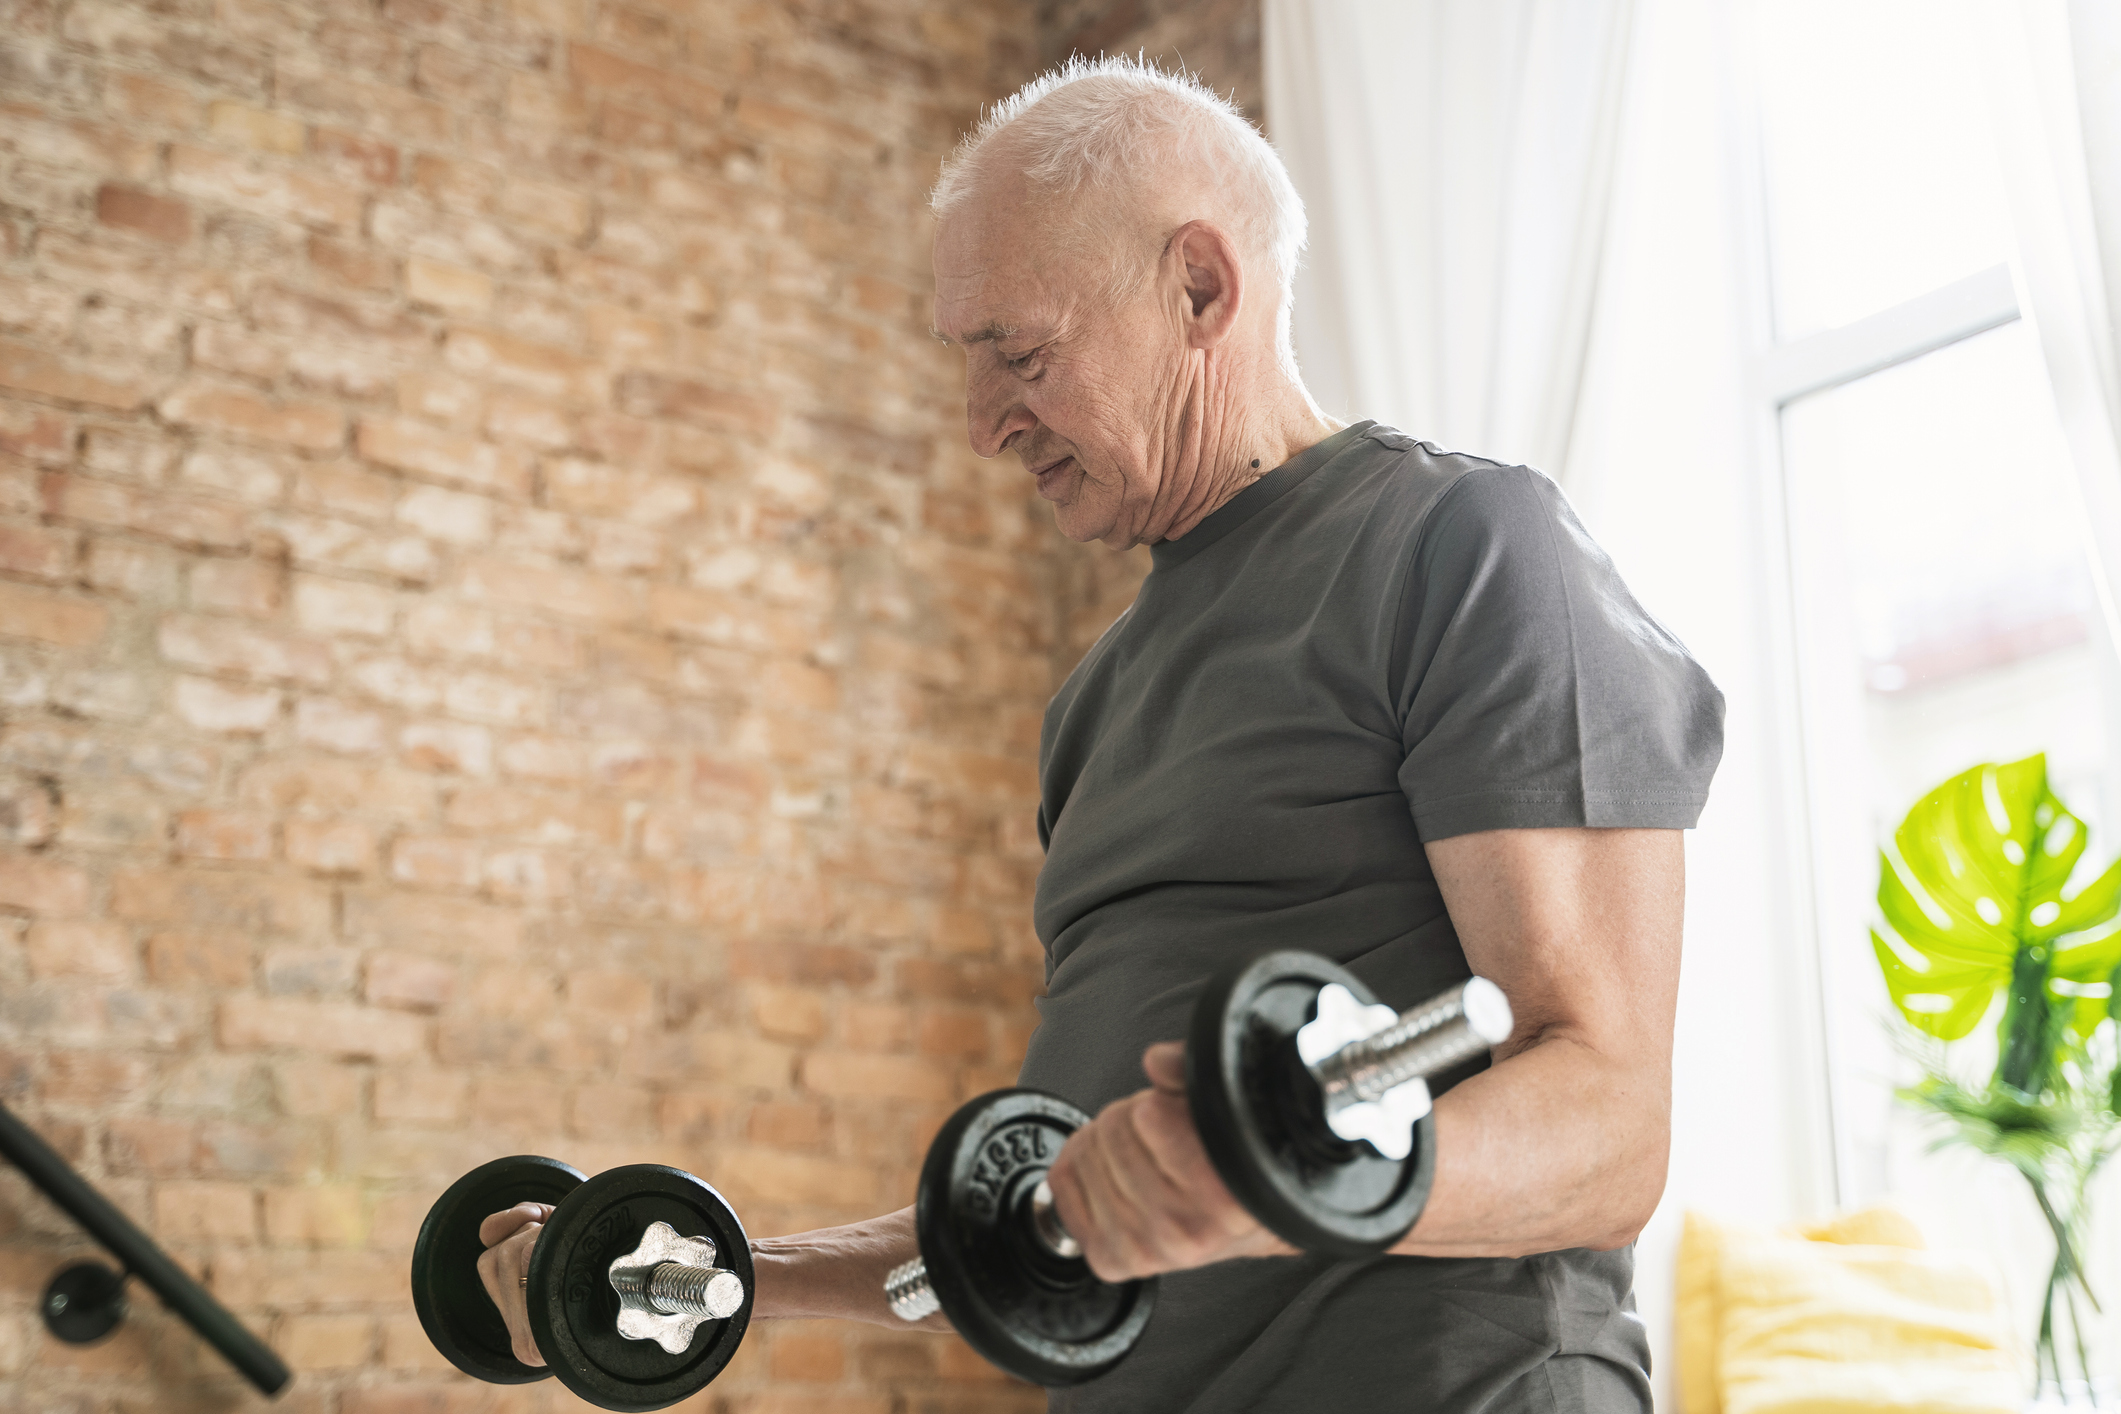 Weight Loss Workouts: Top 3 Exercises For Men Over 50